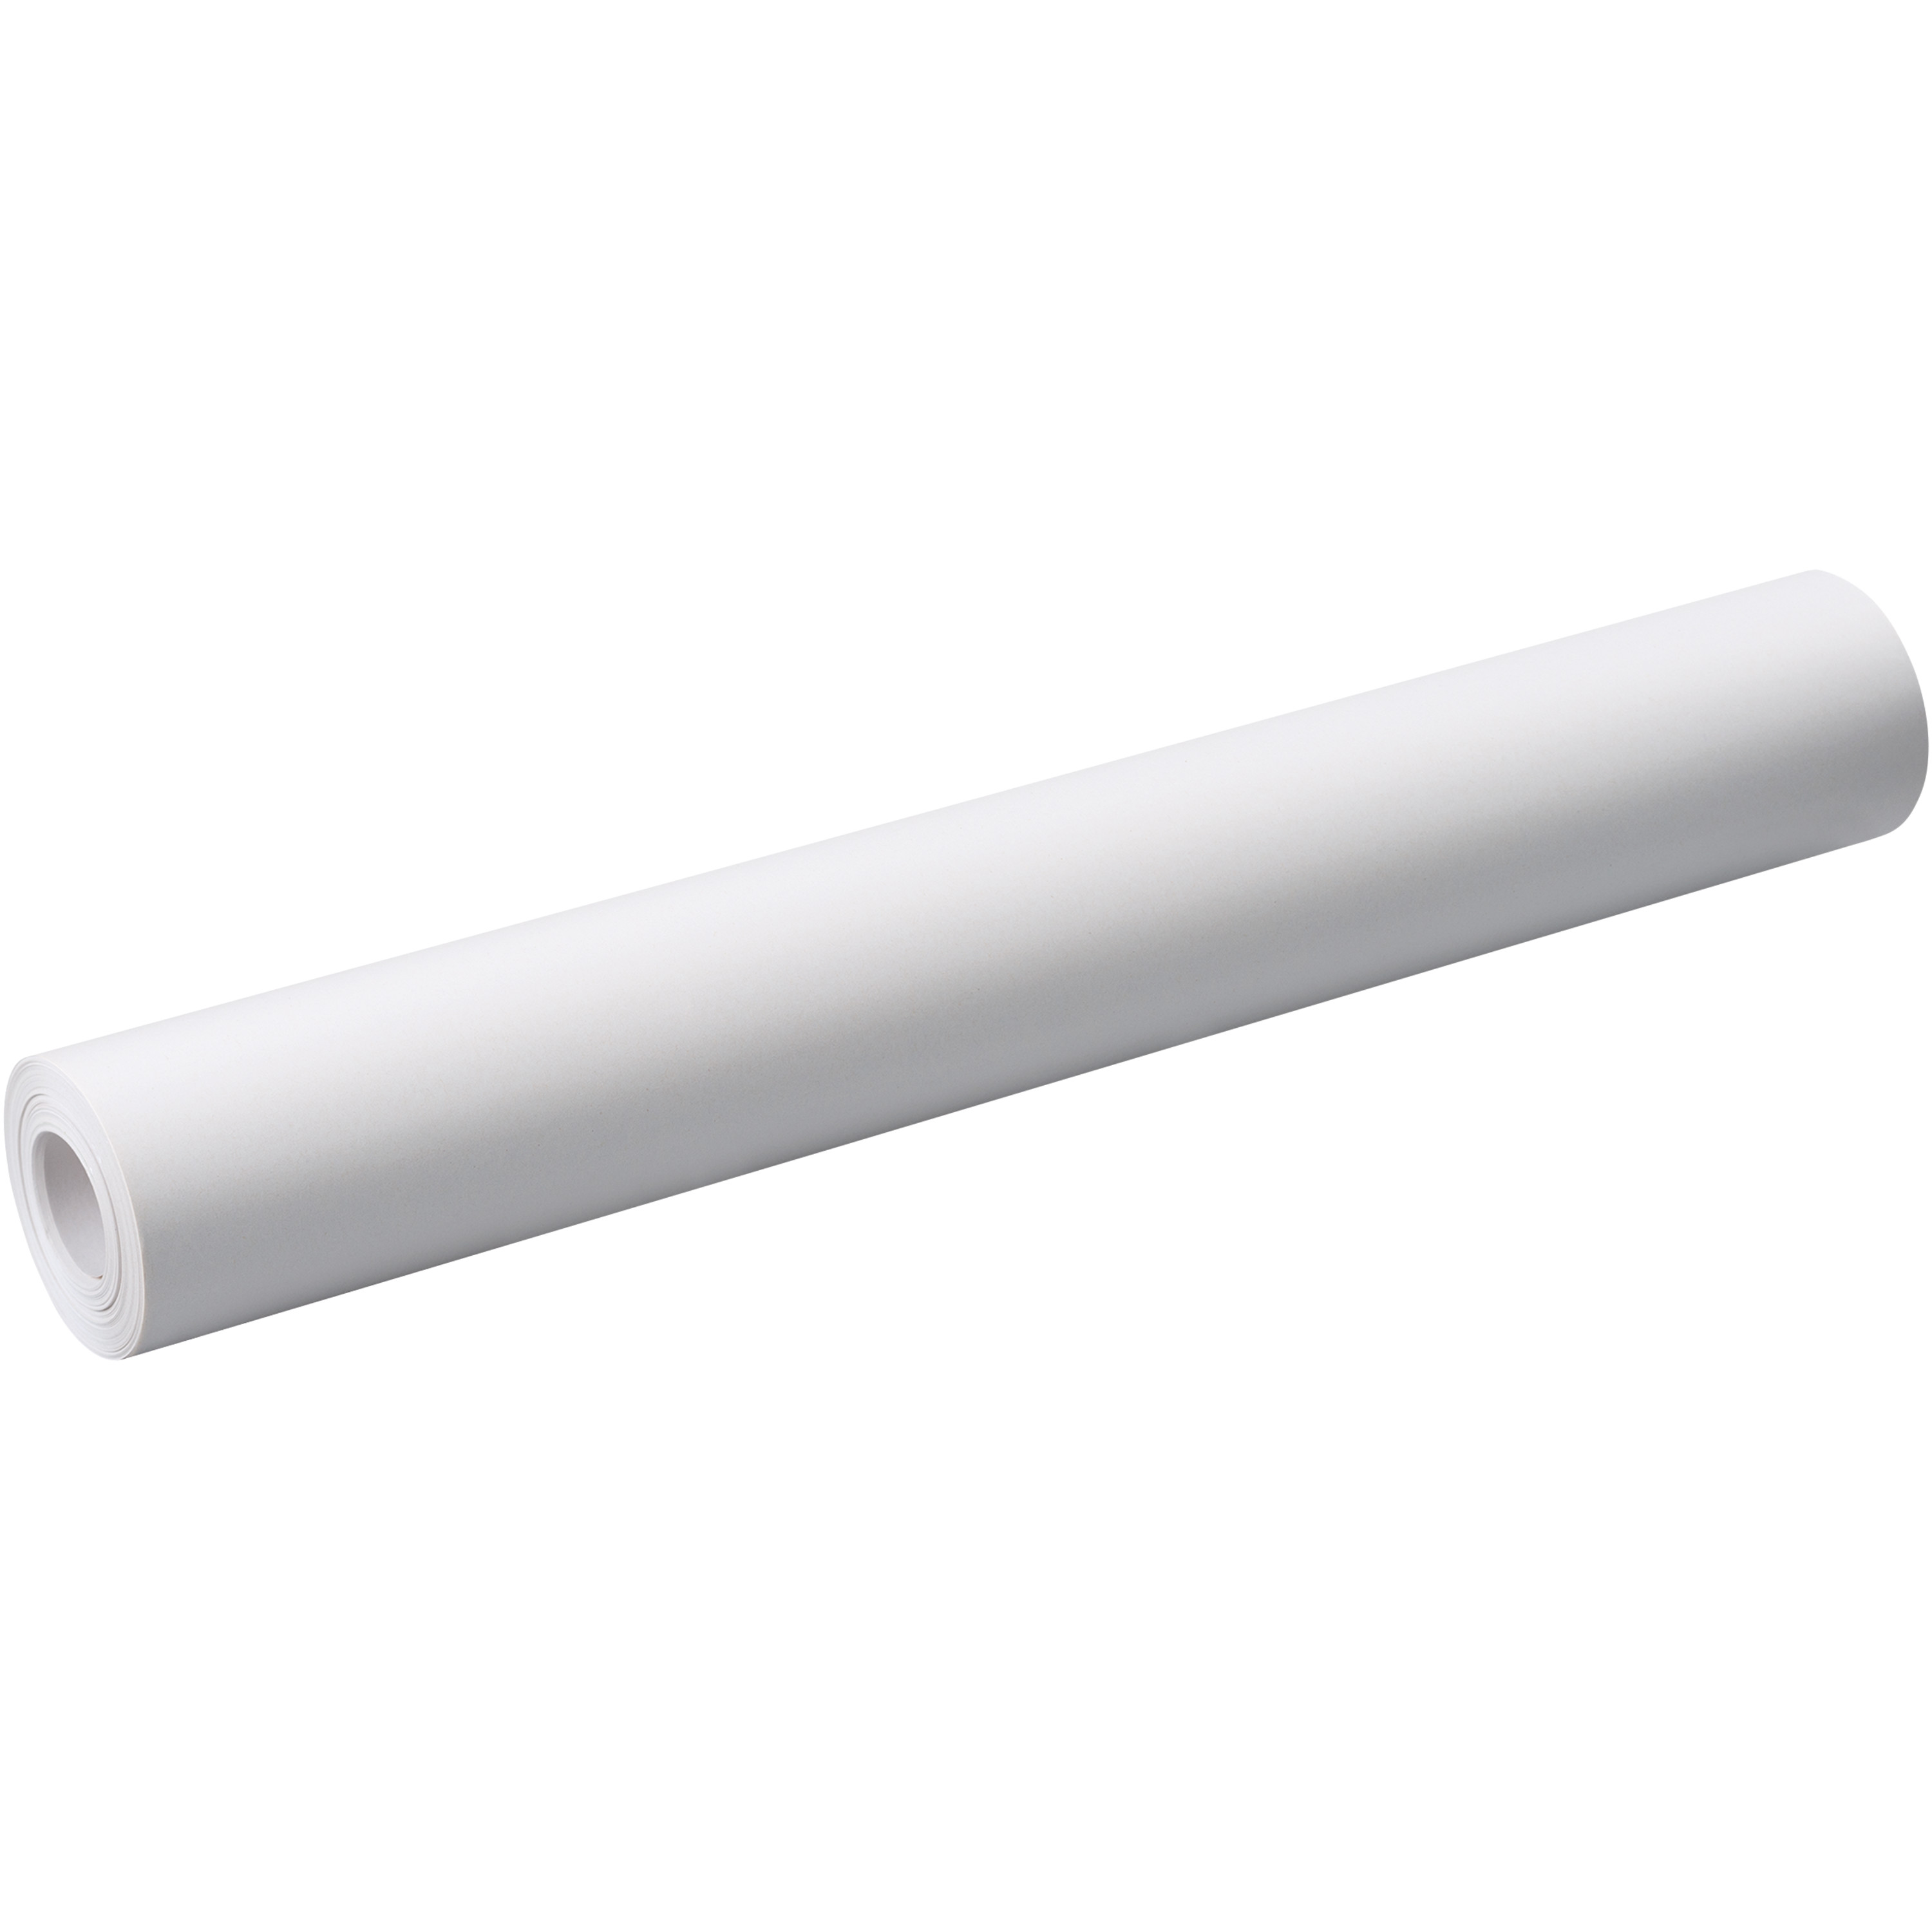 Pacon Easel Roll, 18-Inch x 75-Feet, White, 1 Roll of Paper - image 2 of 7